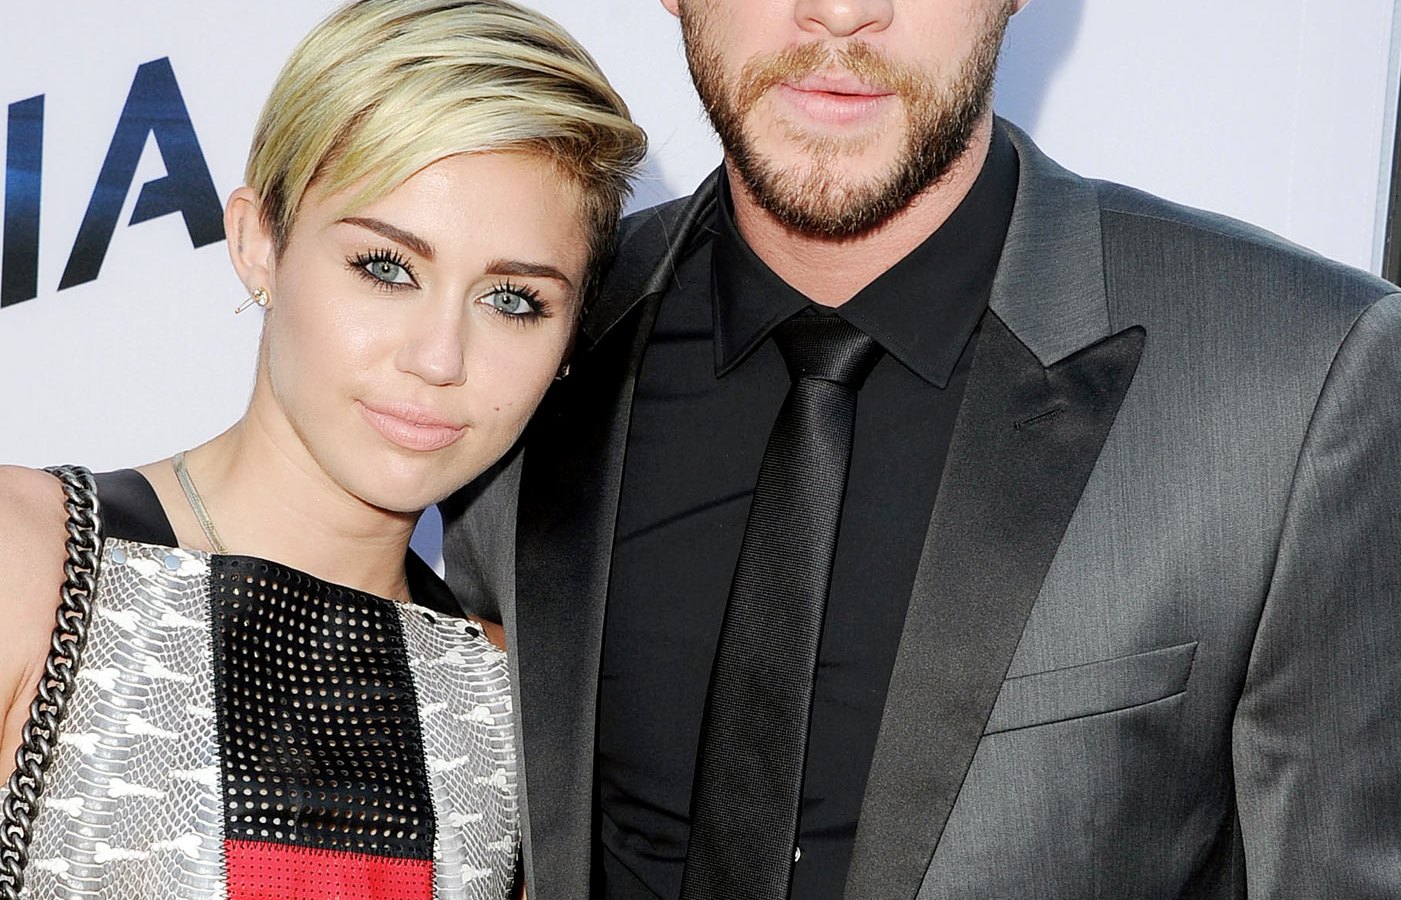 Miley Cyrus wanted to dump Liam Hemsworth in February, she reveals